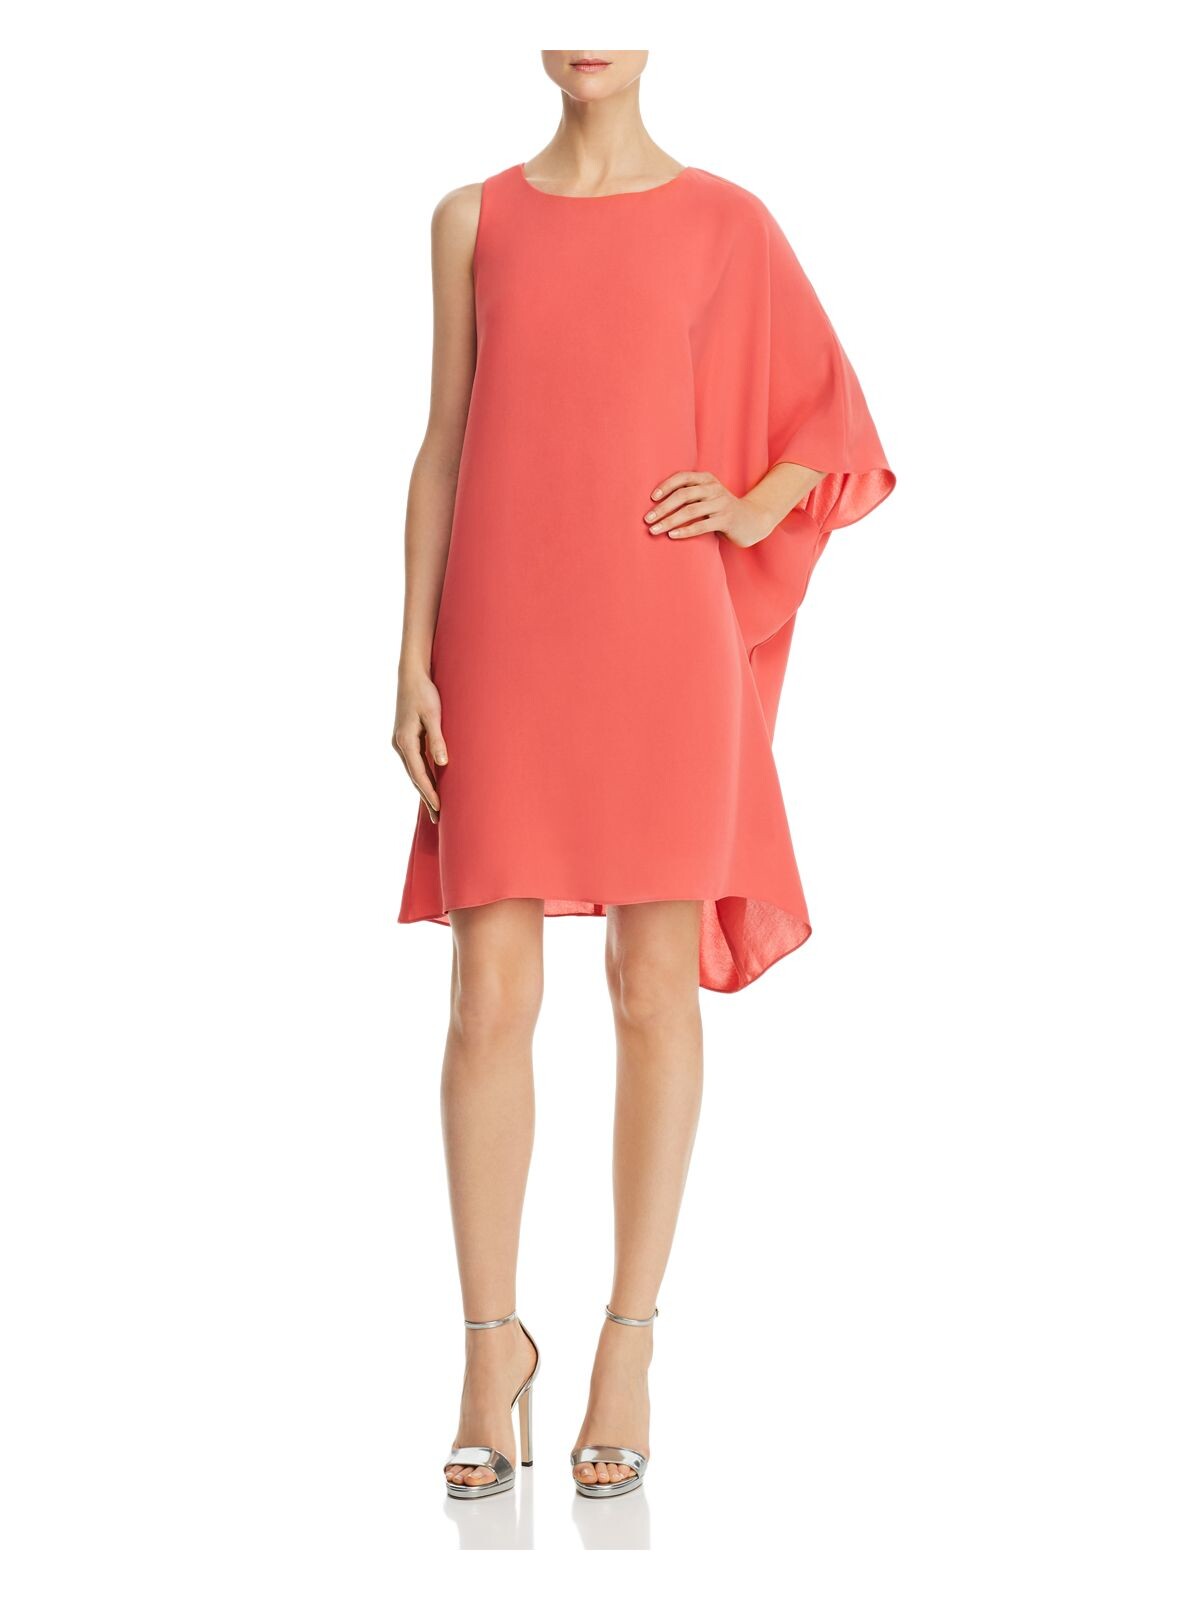 ADRIANNA PAPELL Womens Coral Jewel Neck Knee Length Evening Shift Dress 4